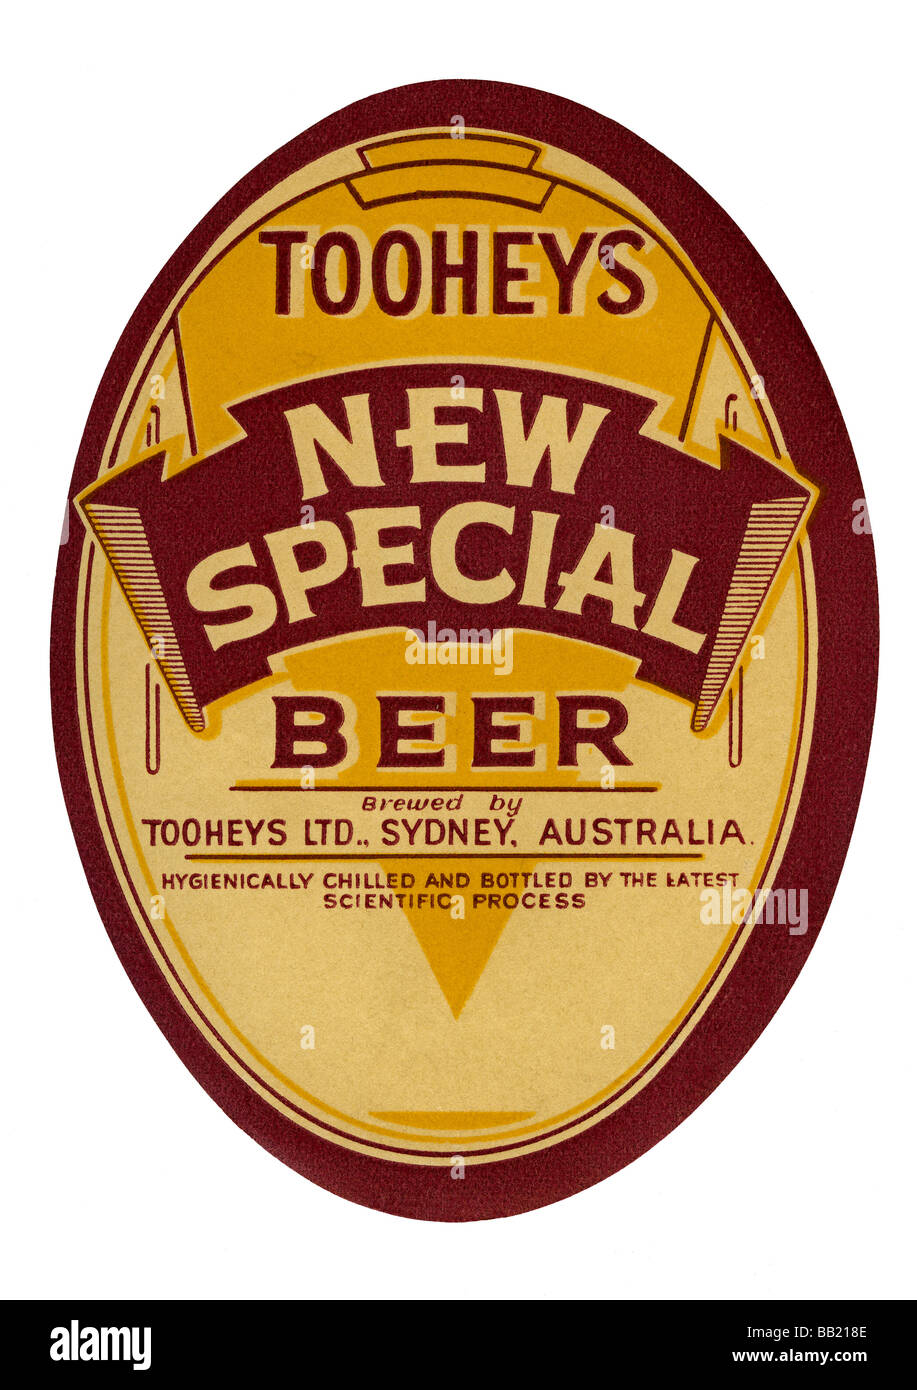 Old Australian beer label for Toohey's New Special Beer, Sydney, New South Wales Stock Photo